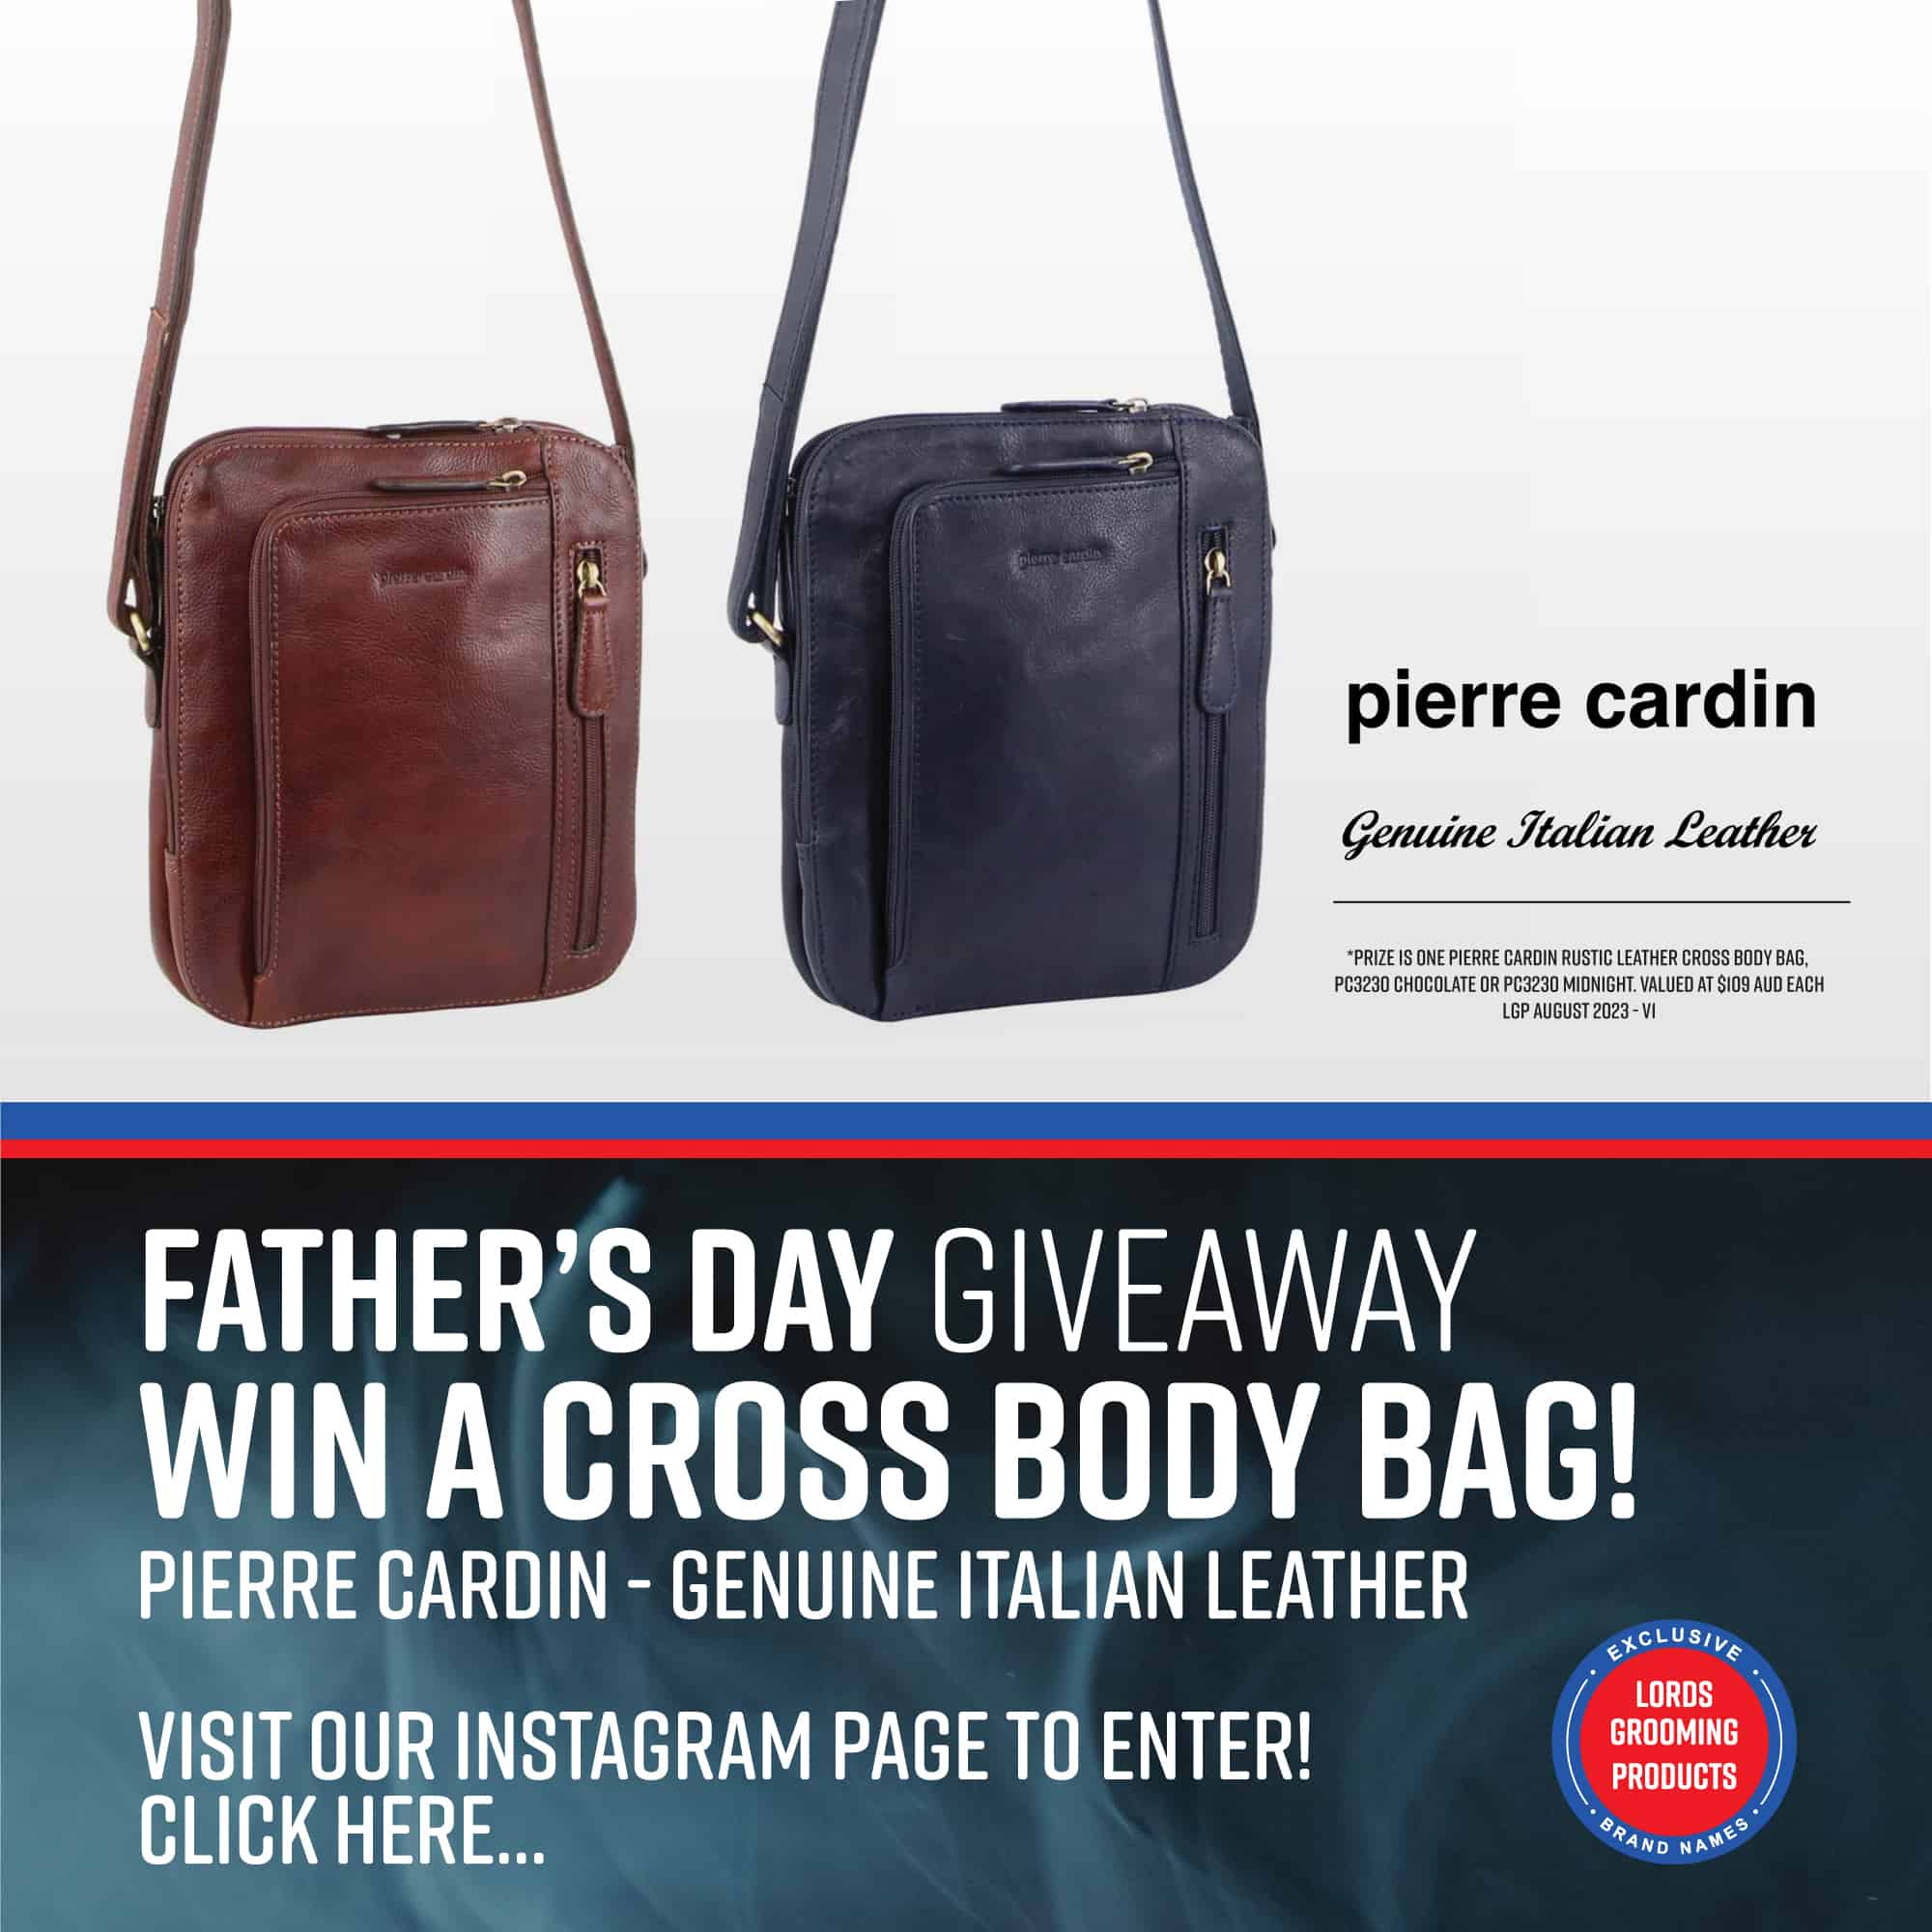 Father's Give Away | Pierre Cardin Cross Body Bag